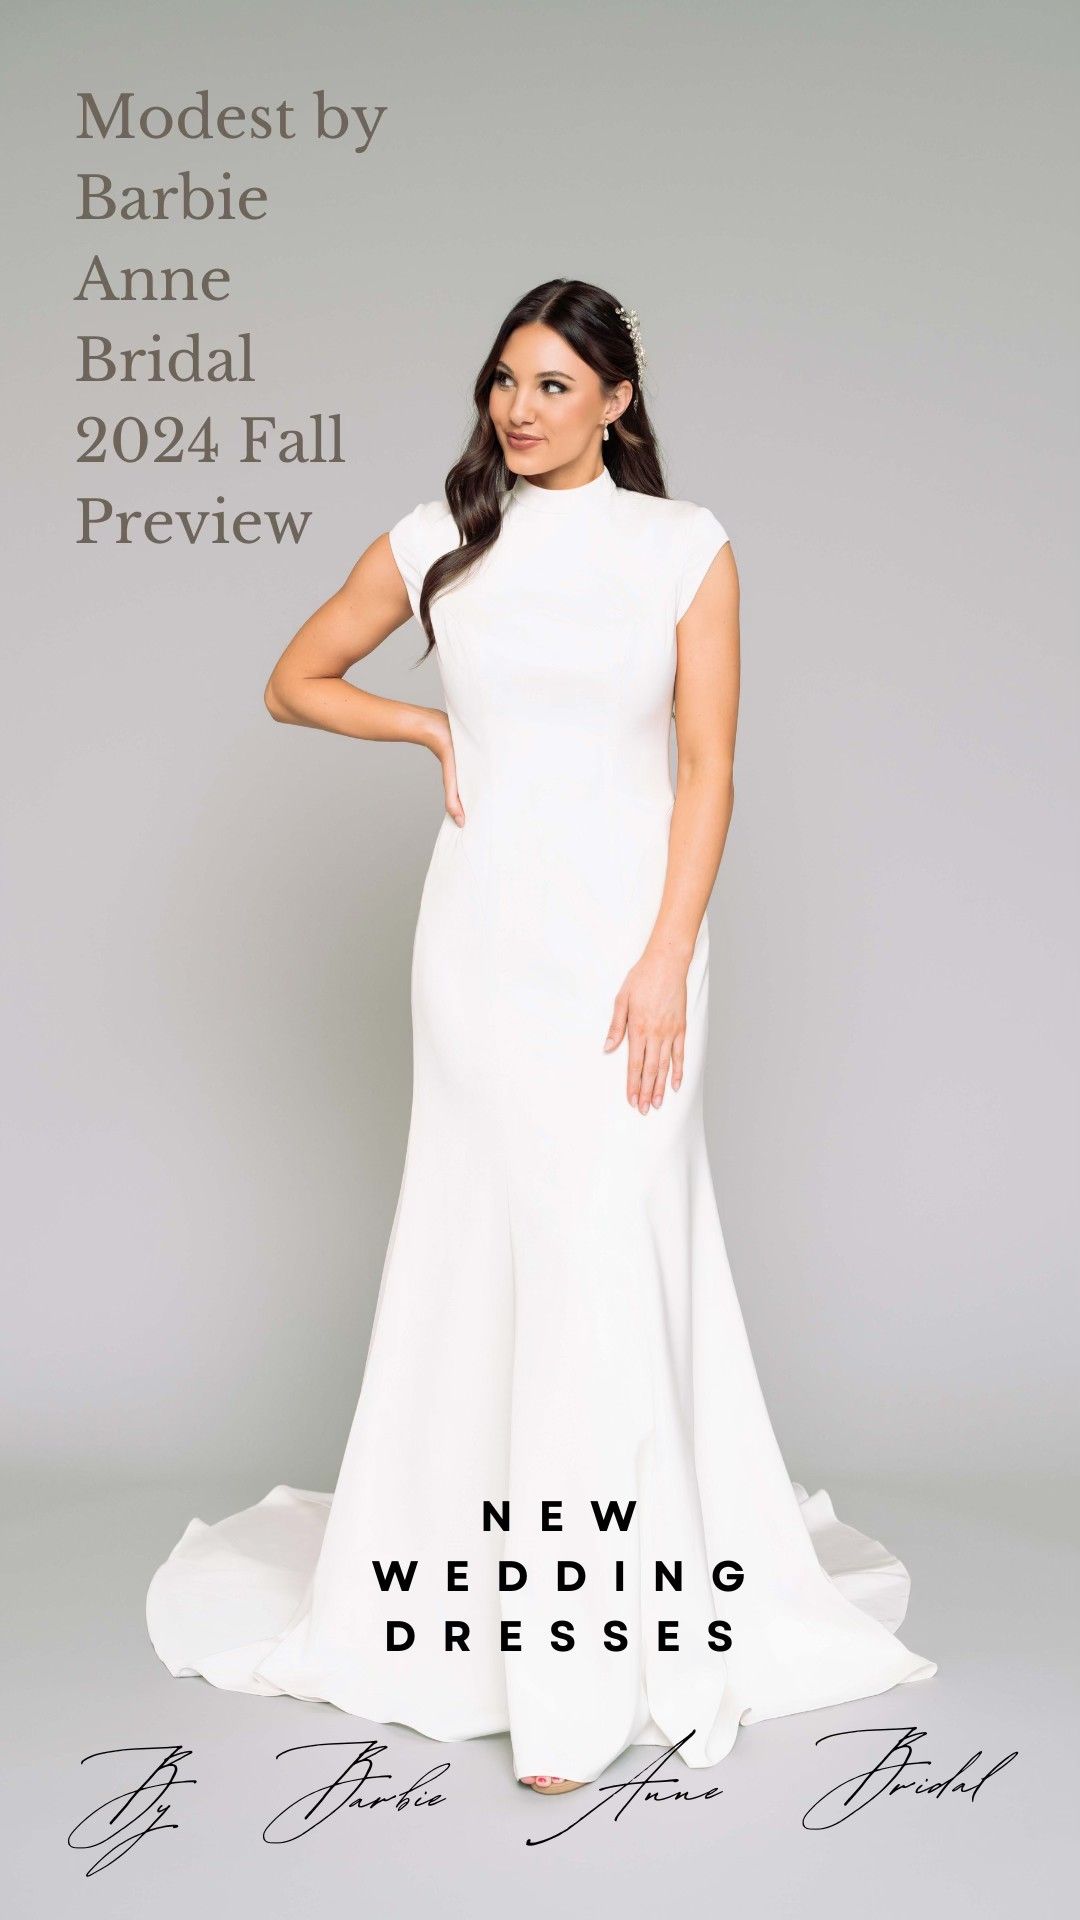 Modest by Barbie Anne Bridal 2024 Fall Preview